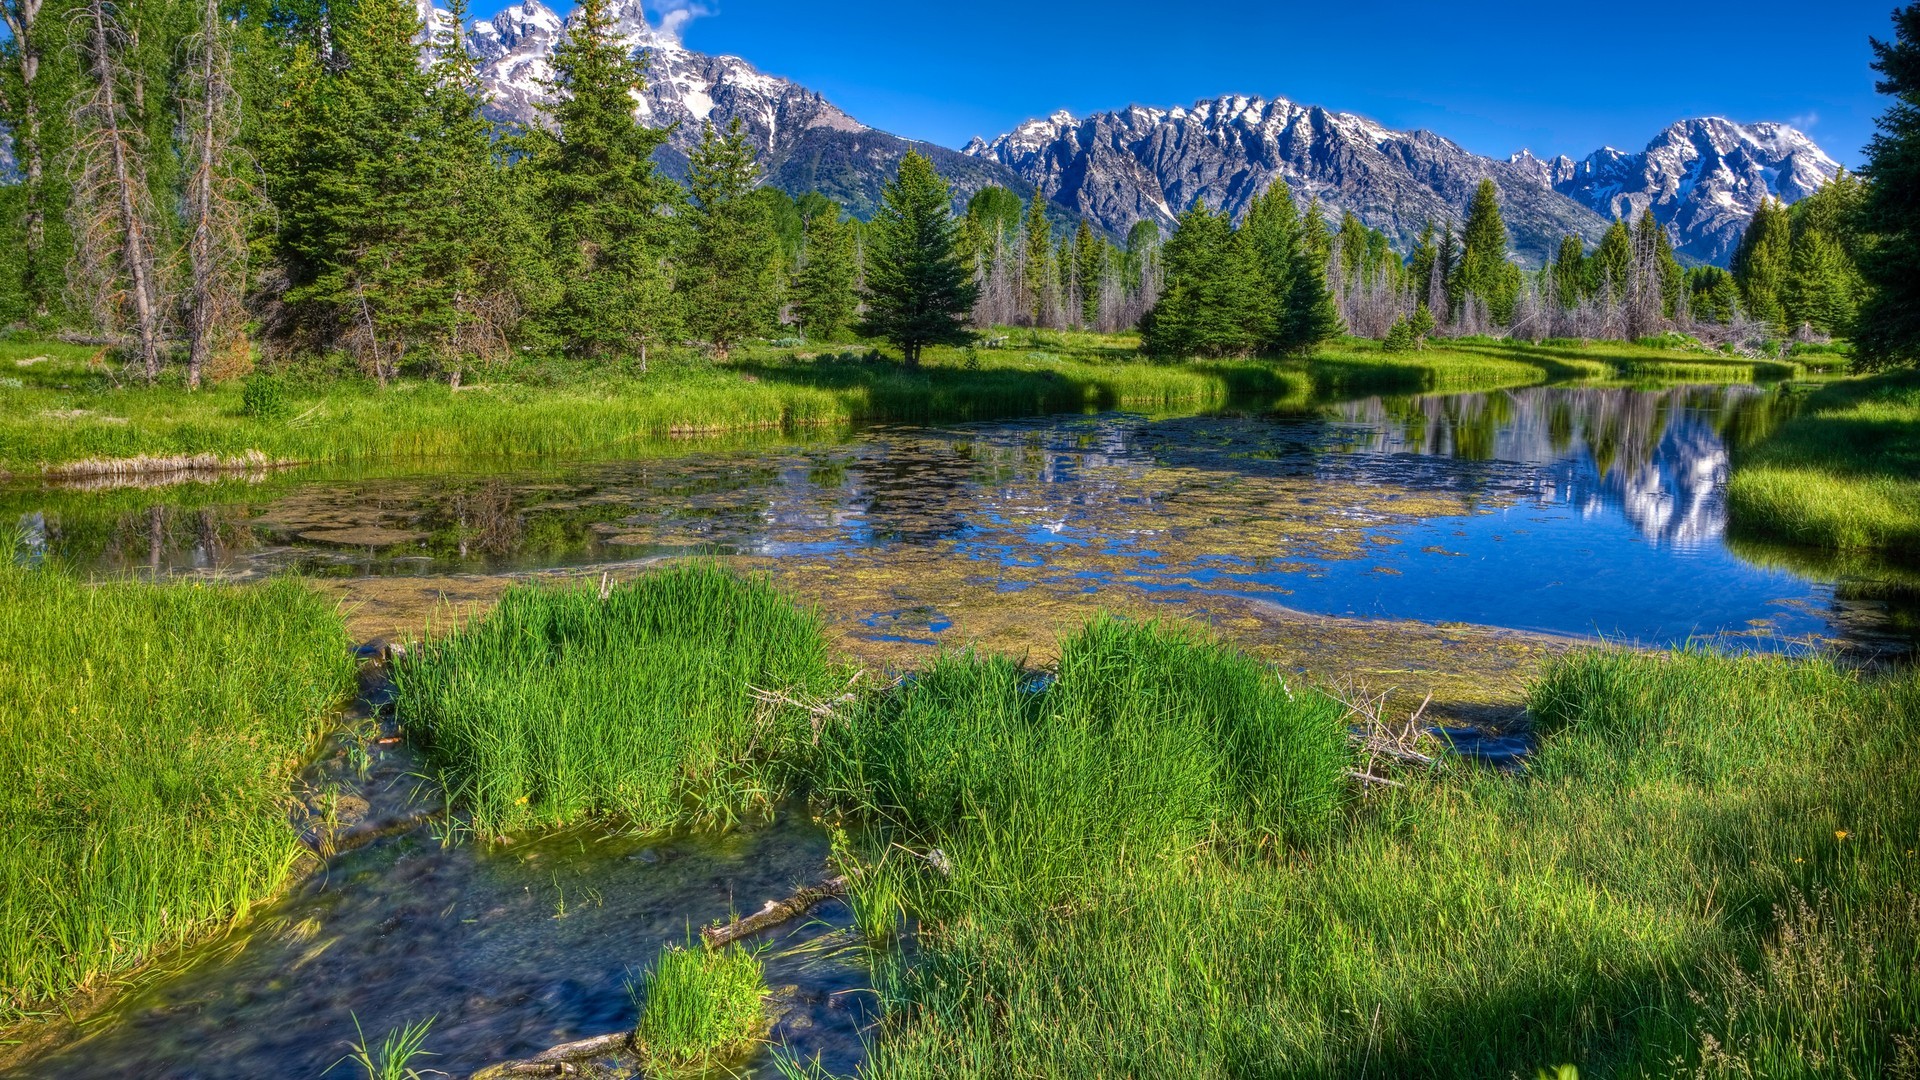 General 1920x1080 landscape water nature mountains trees grass